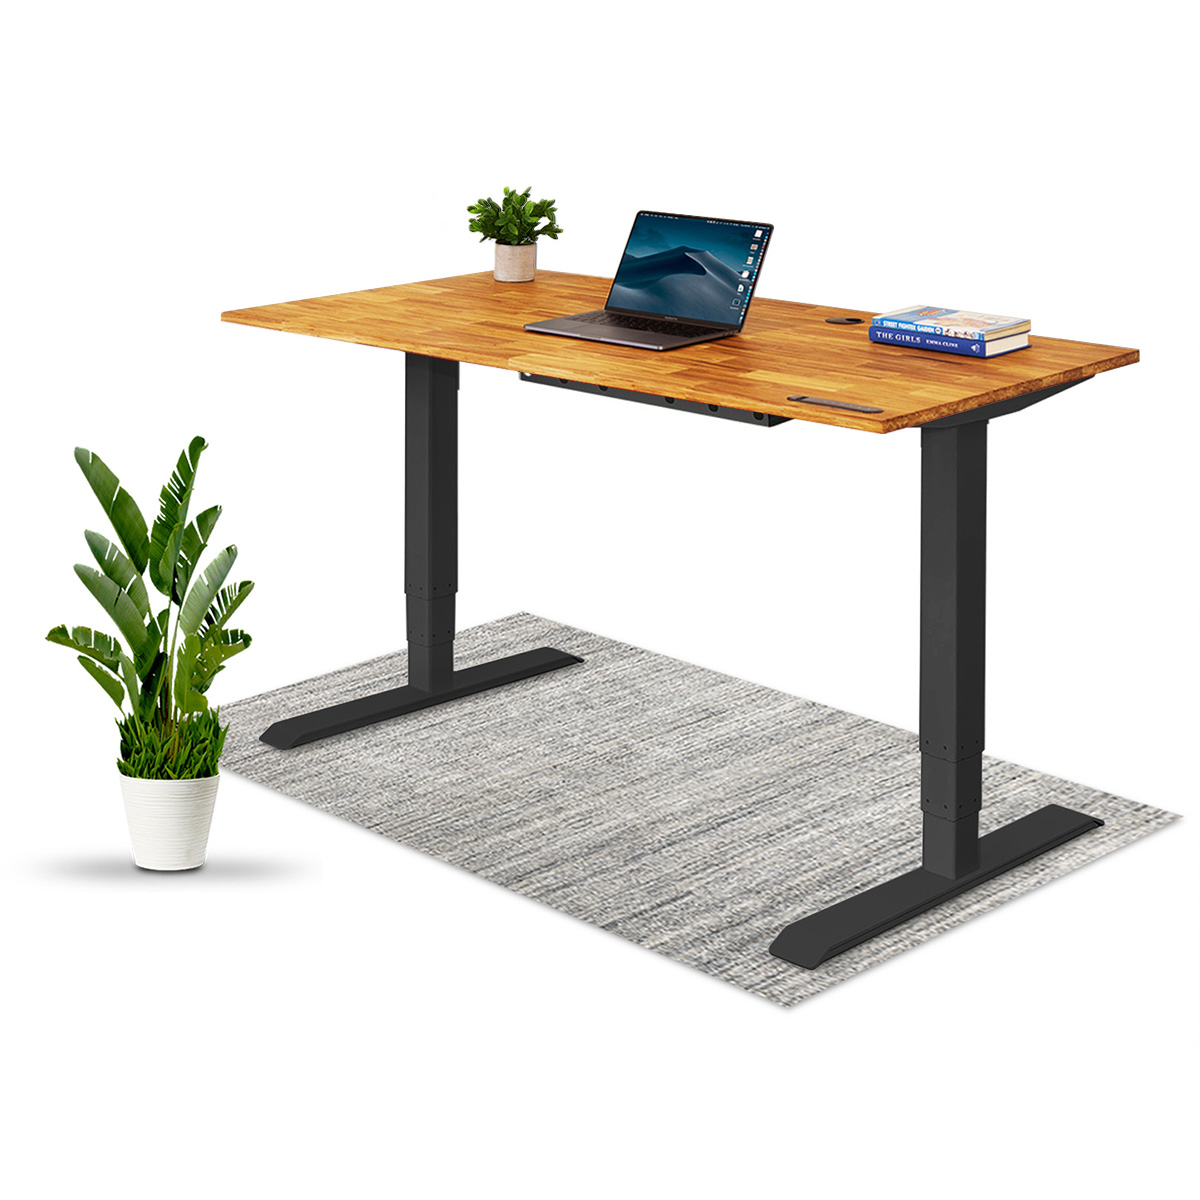 TerraDesk | Eco-Friendly Height-Adjustable Electric Standing Desk by EFFYDESK  EFFYDESK 55" x 29" Black -better made easy-eco-friendly-sustainable-gifting